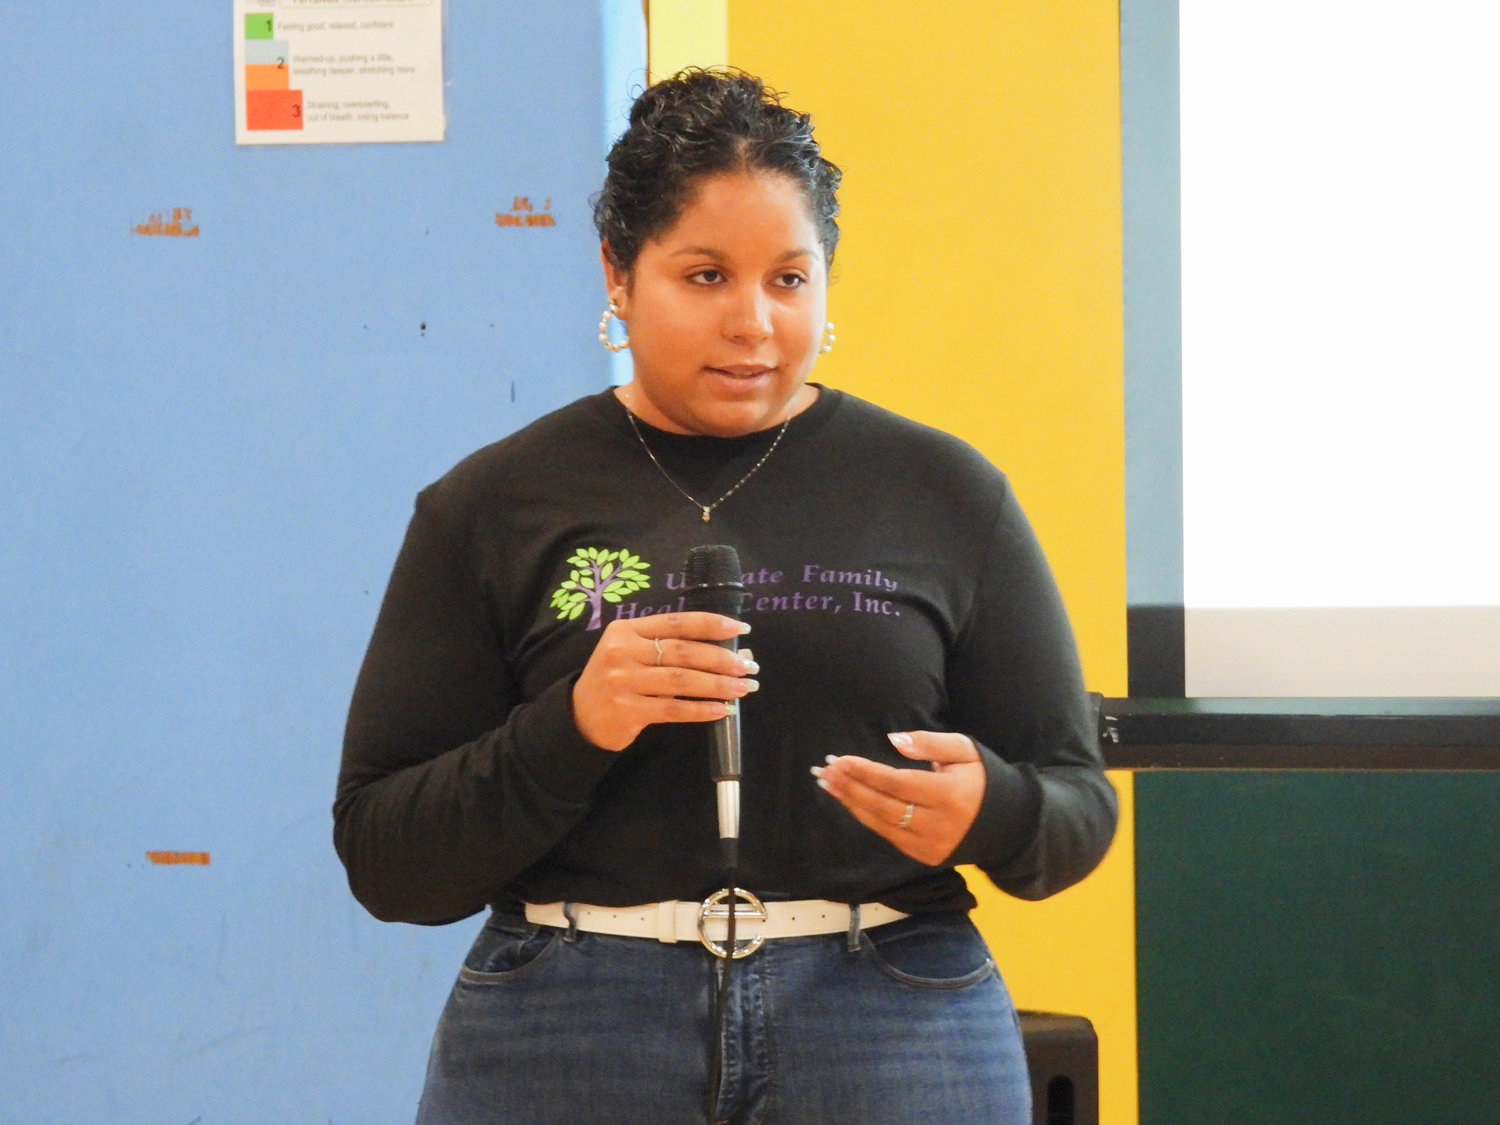 Torie Hairston, director of behavioral health services at Upstate Family Health Center and co-host of the Fair, speaks at the inaugural Community Partner Vendor Fair on Saturday, Sept. 24